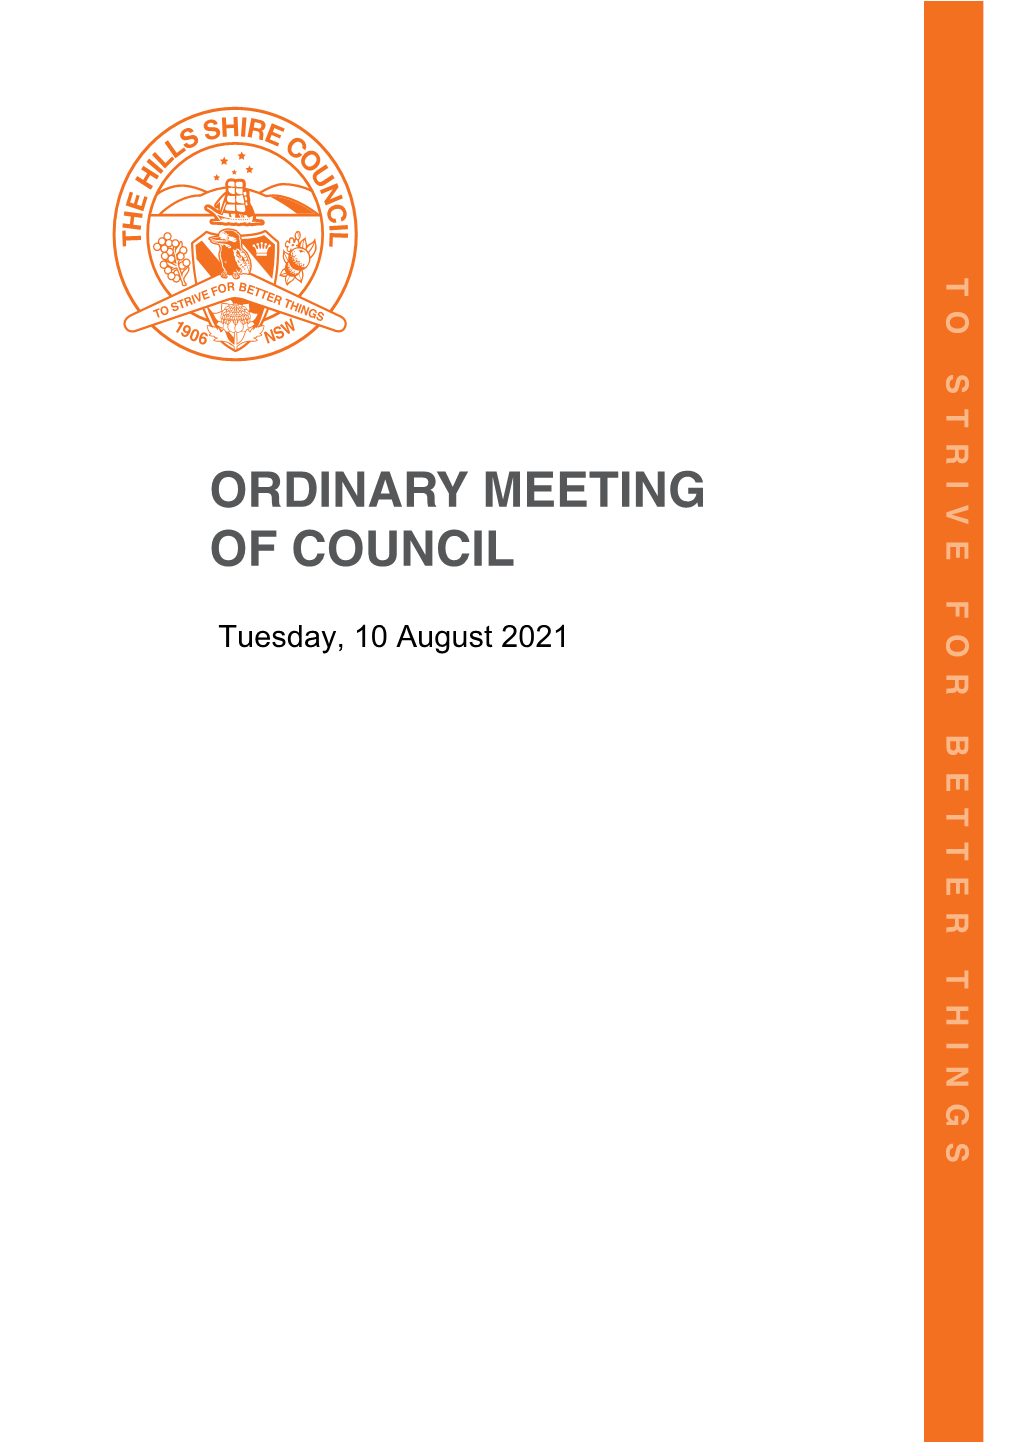 Ordinary Meeting of Council 10 August, 2021